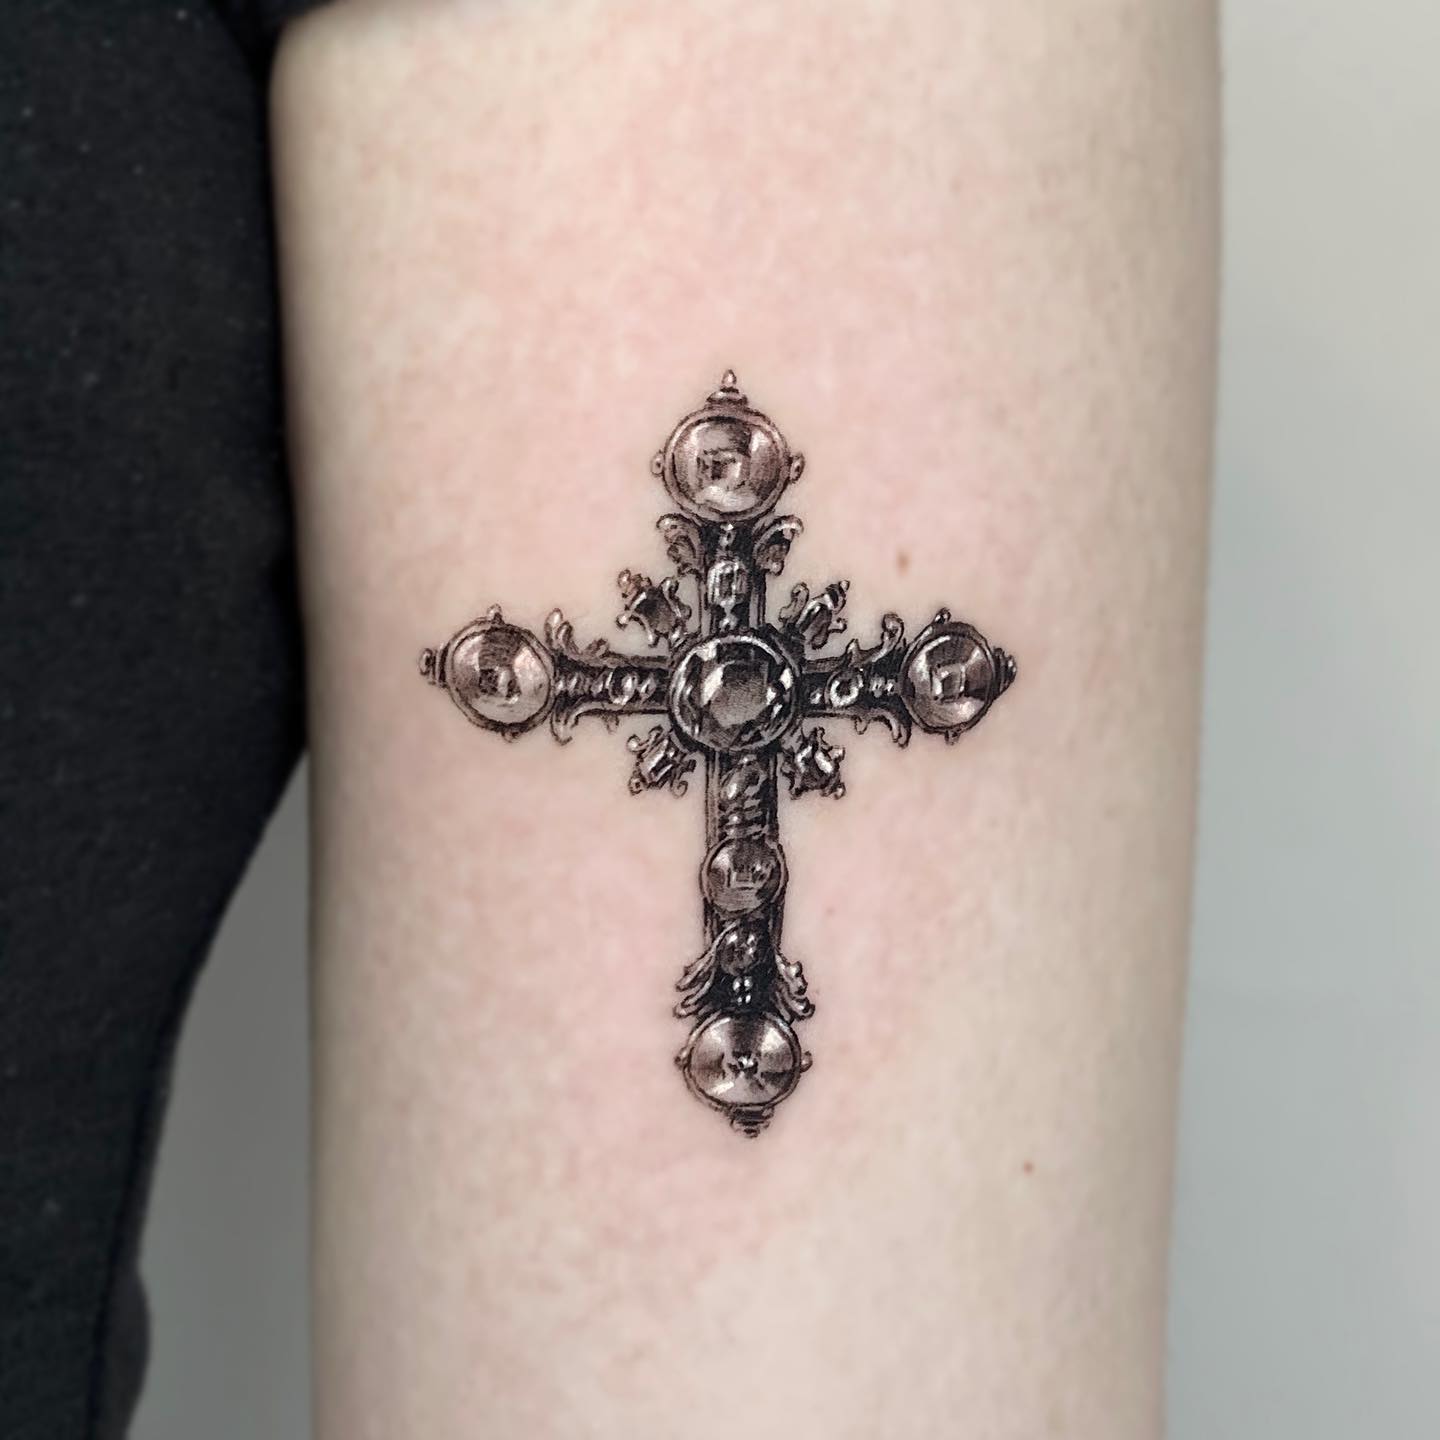 Some people choose simple tattoos while others prefer to have ornamented ones. The cross above looks super-gorgeous with its decorations. To feel the royalty to the fullest, you need to get this tattoo as soon as possible.